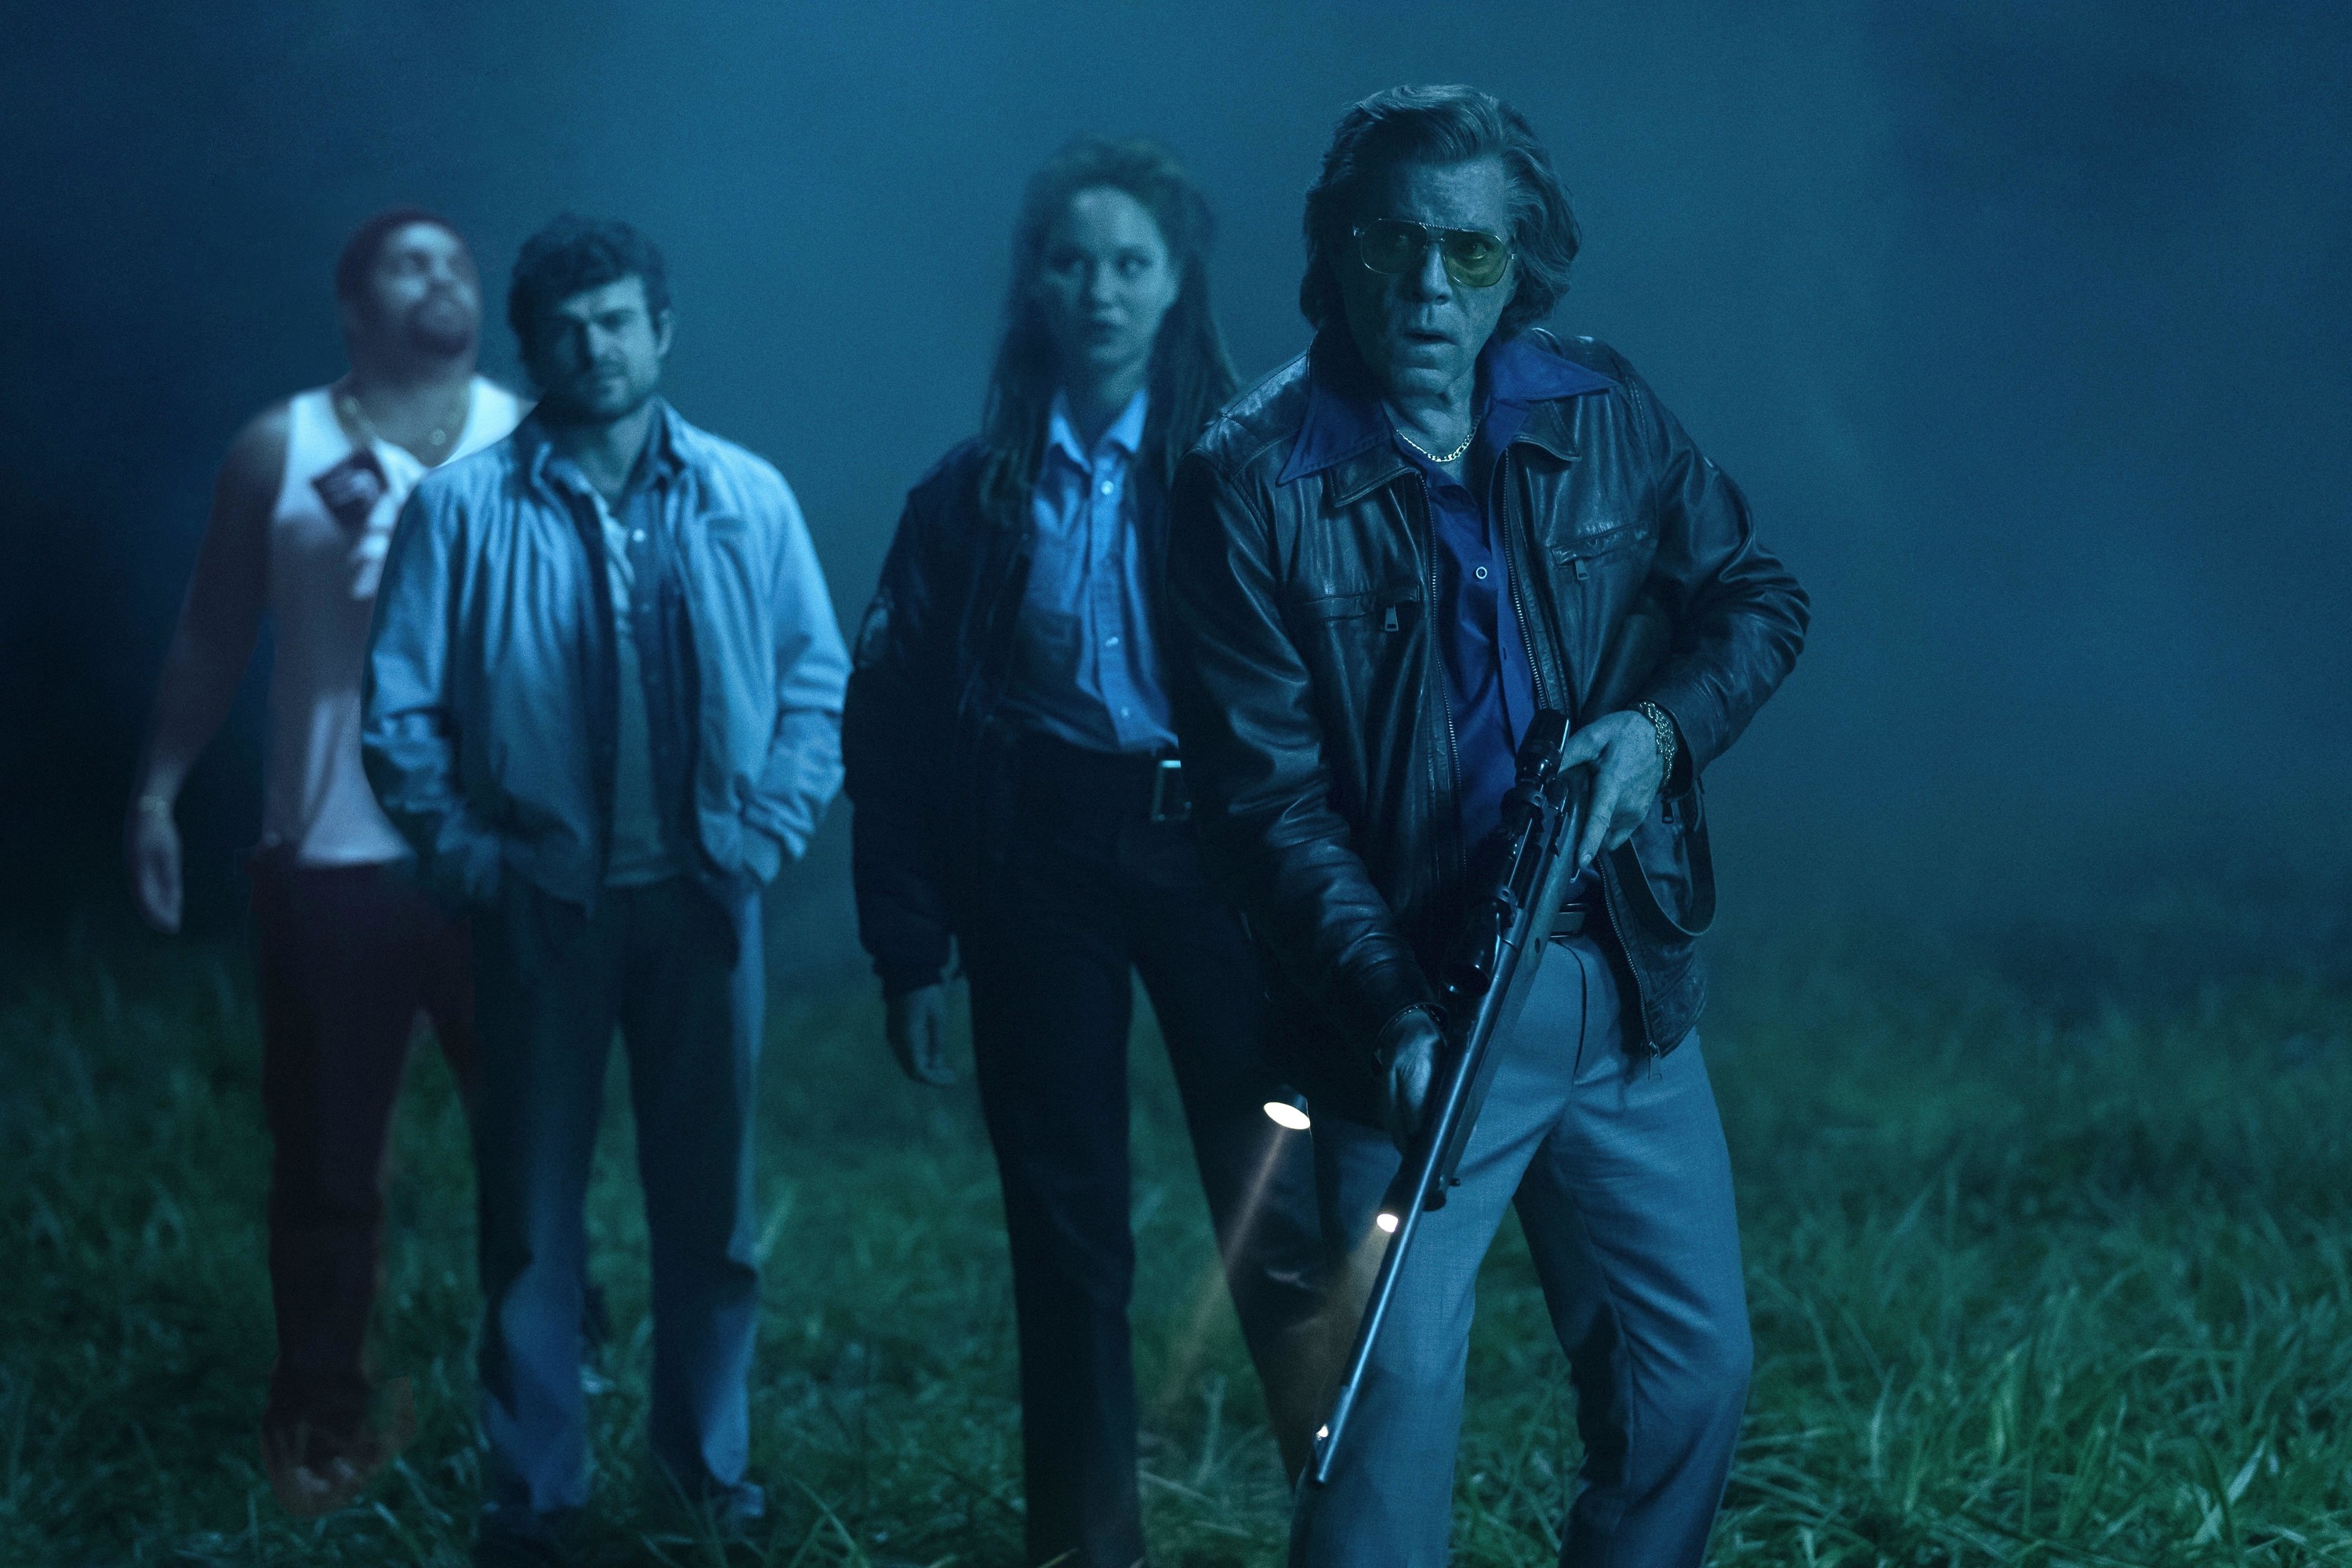 Four strangers hunt for something in a misty field at night